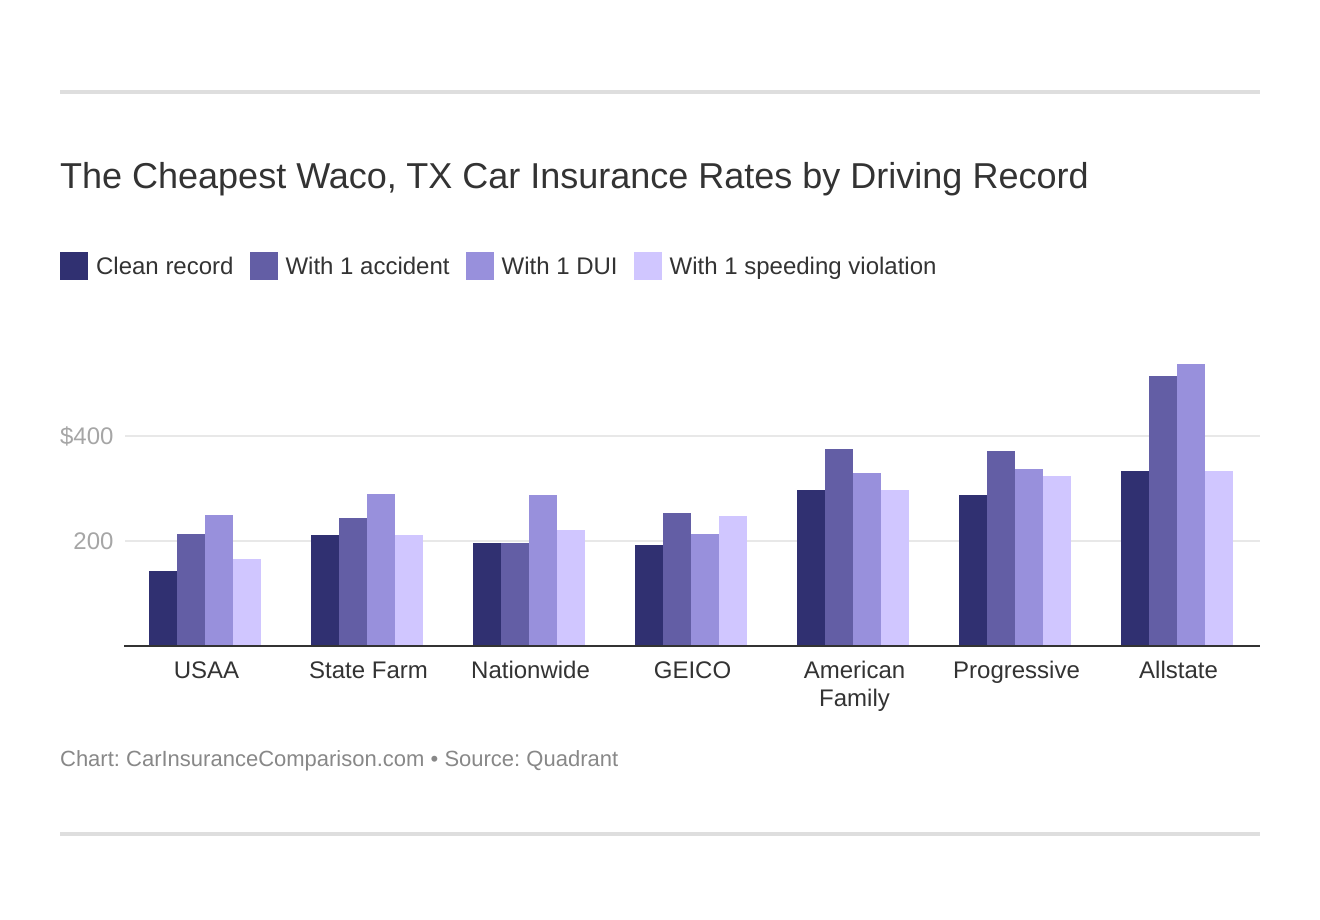 The Cheapest Waco, TX Car Insurance Rates by Driving Record